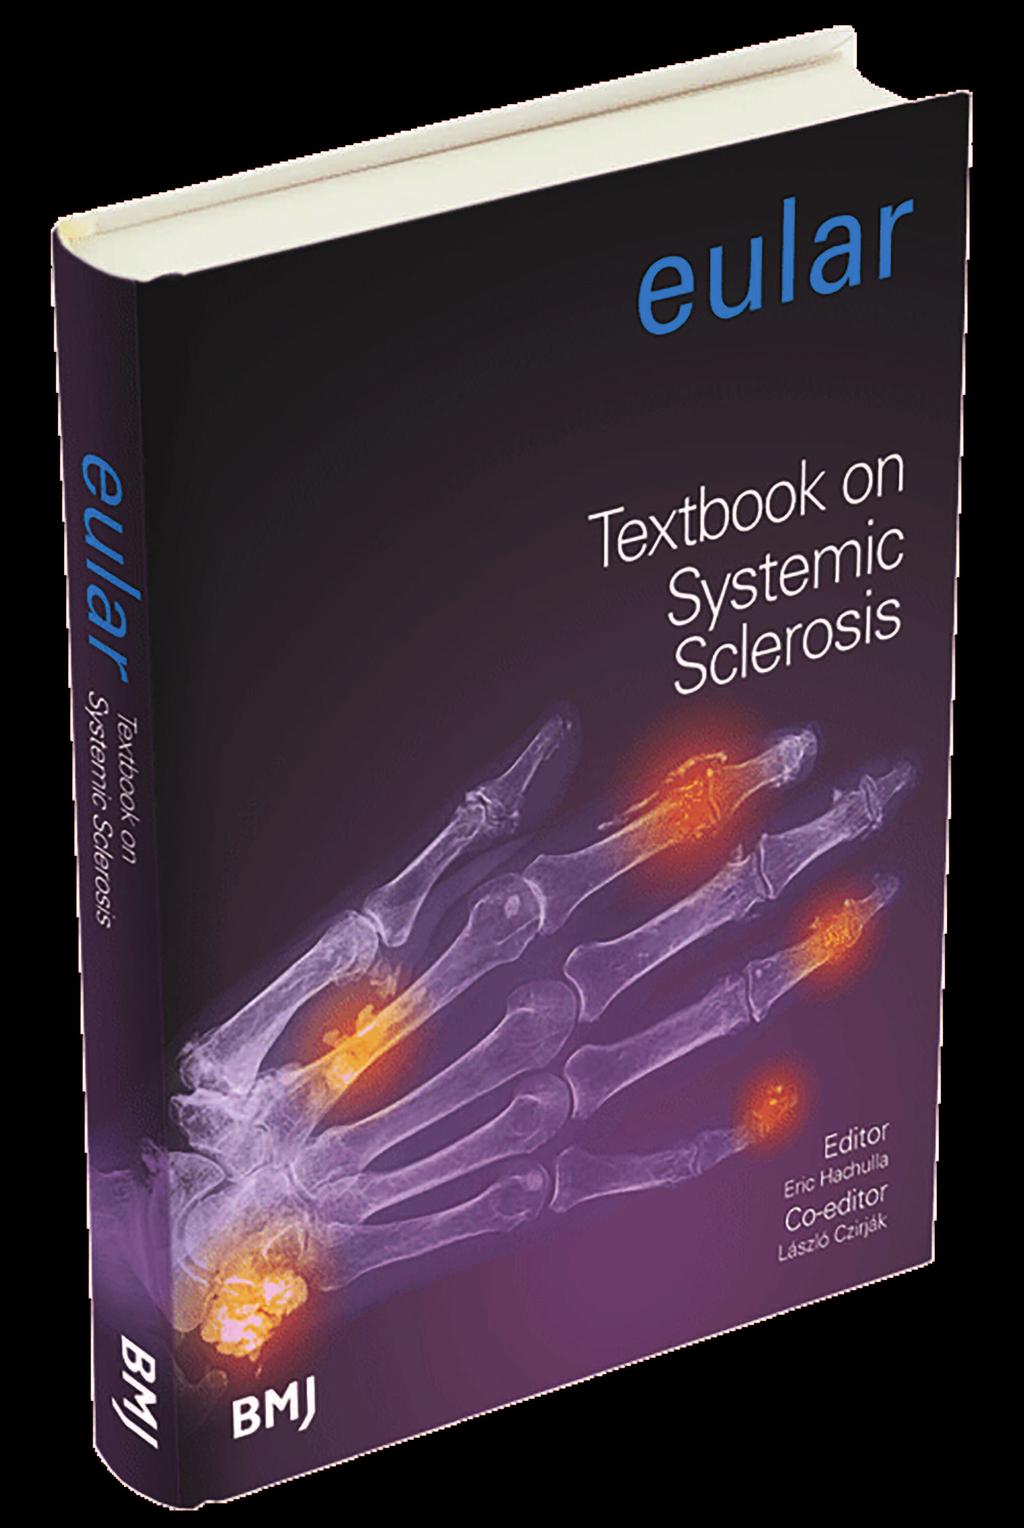 EDUCATION FOR PROFESSIONALS THE EULAR BOOKSHELF EULAR TEXTBOOK ON RHEUMATIC DISEASES NEW: 2 nd edition of the EULAR Textbook on Rheumatic Diseases Book price: EUR 100, available at the EULAR